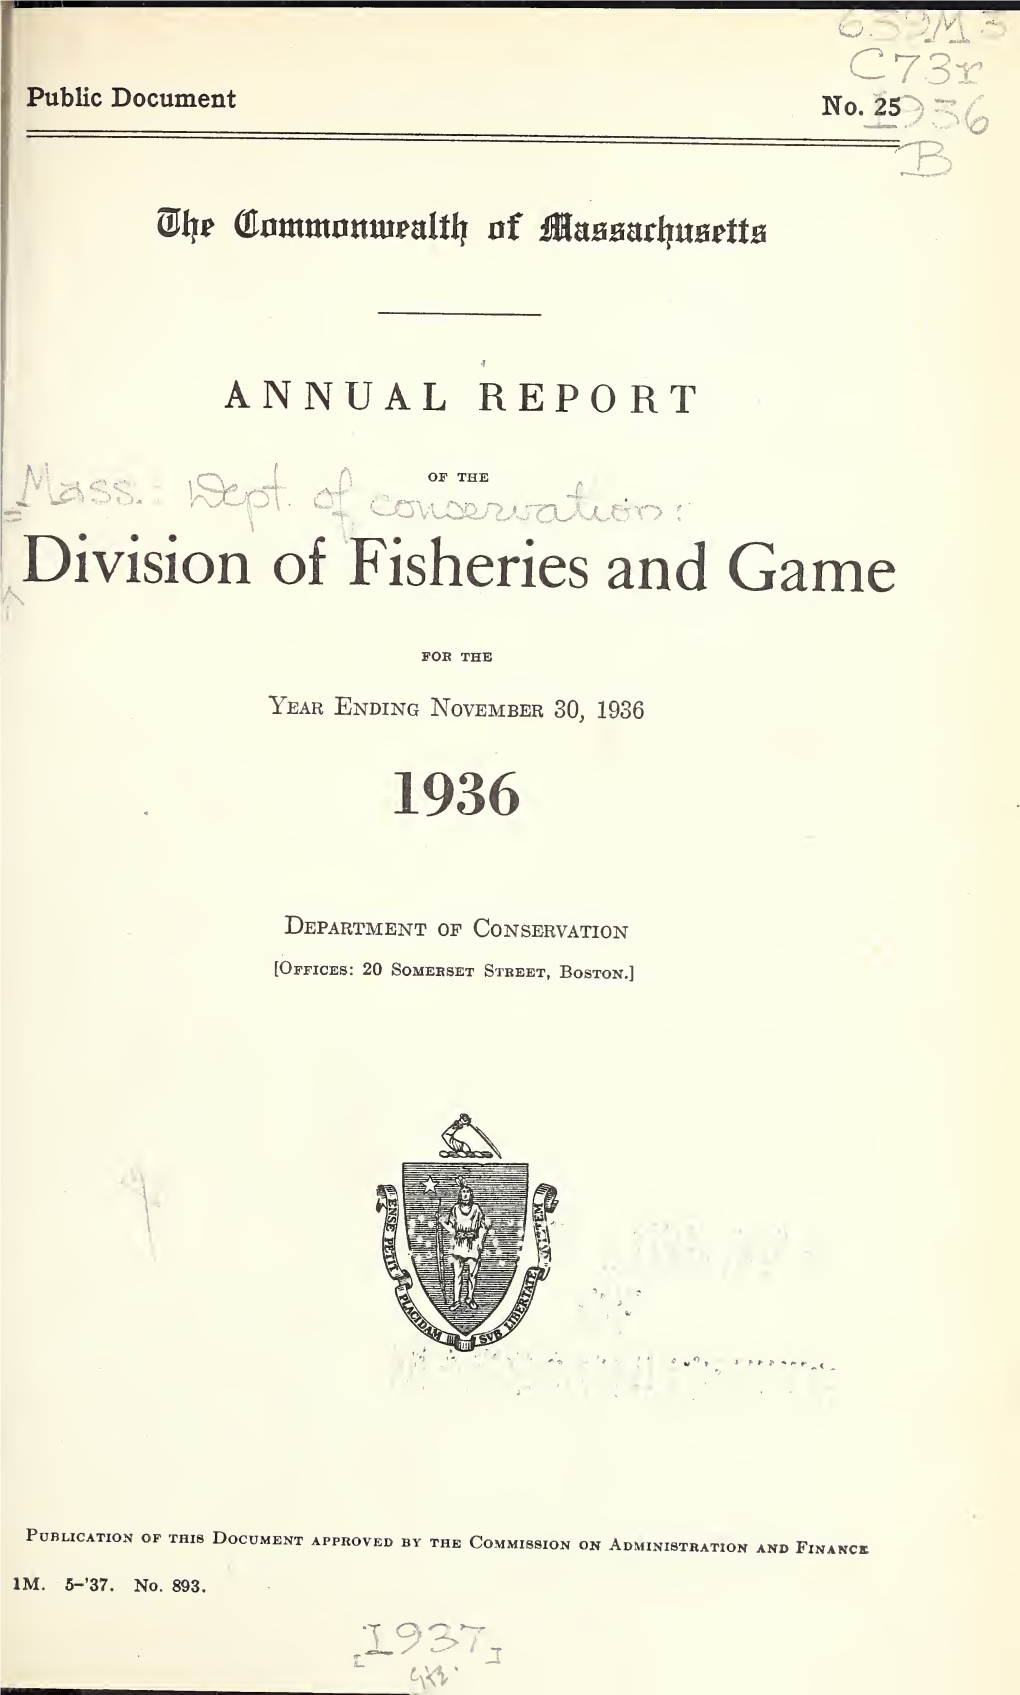 Annual Report of the Division of Fisheries and Game (1934-1939)